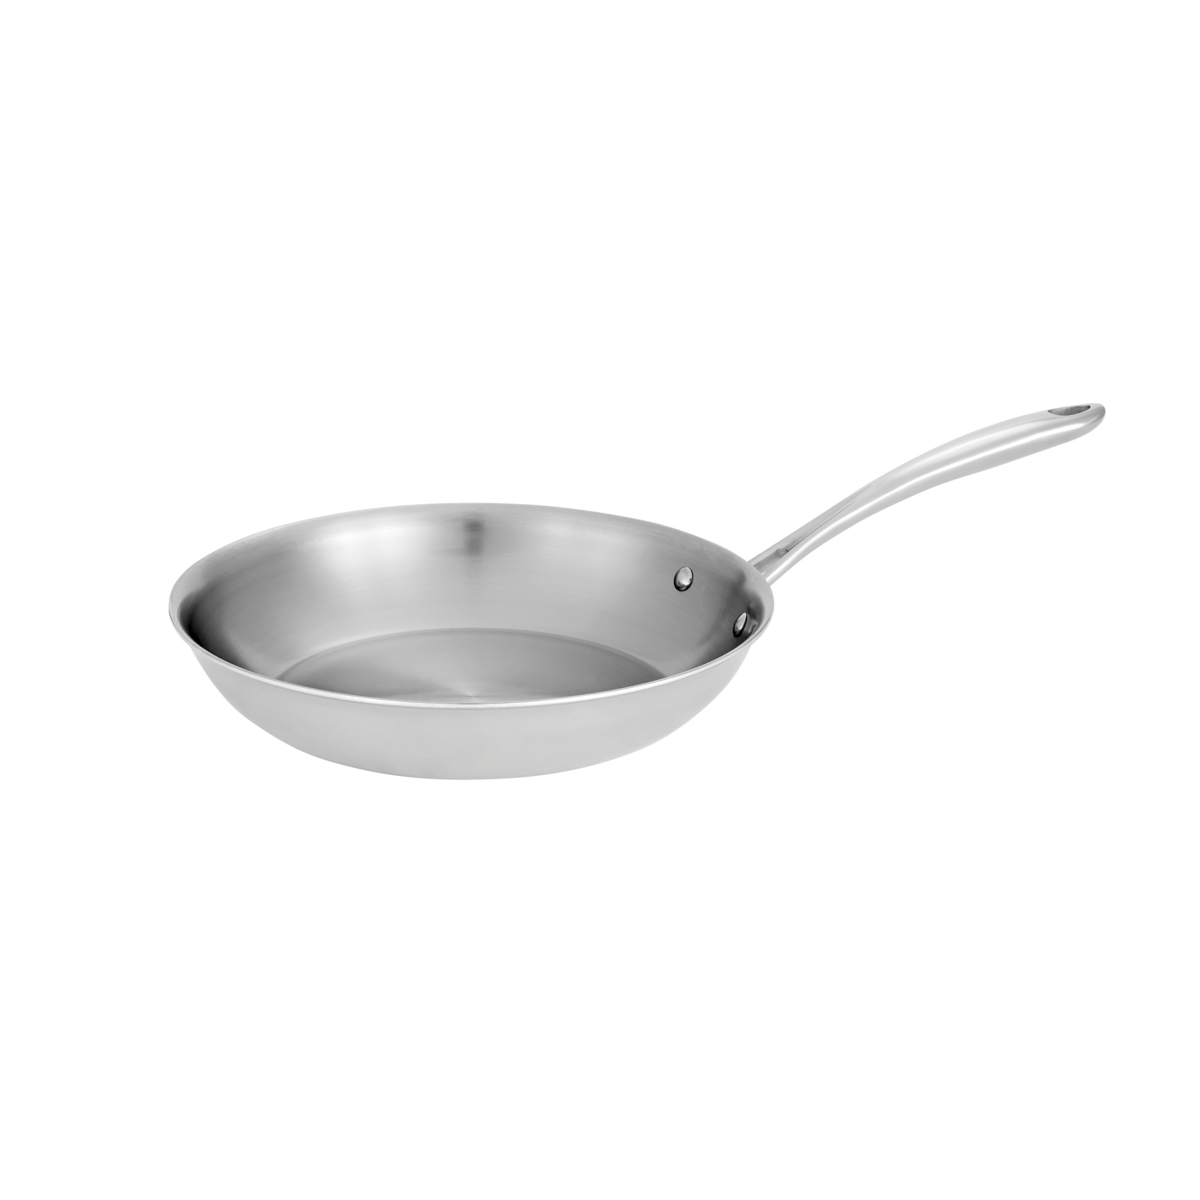 Tramontina Tri-Ply Clad Stainless Steel Fry Pan, Multiple Sizes-3